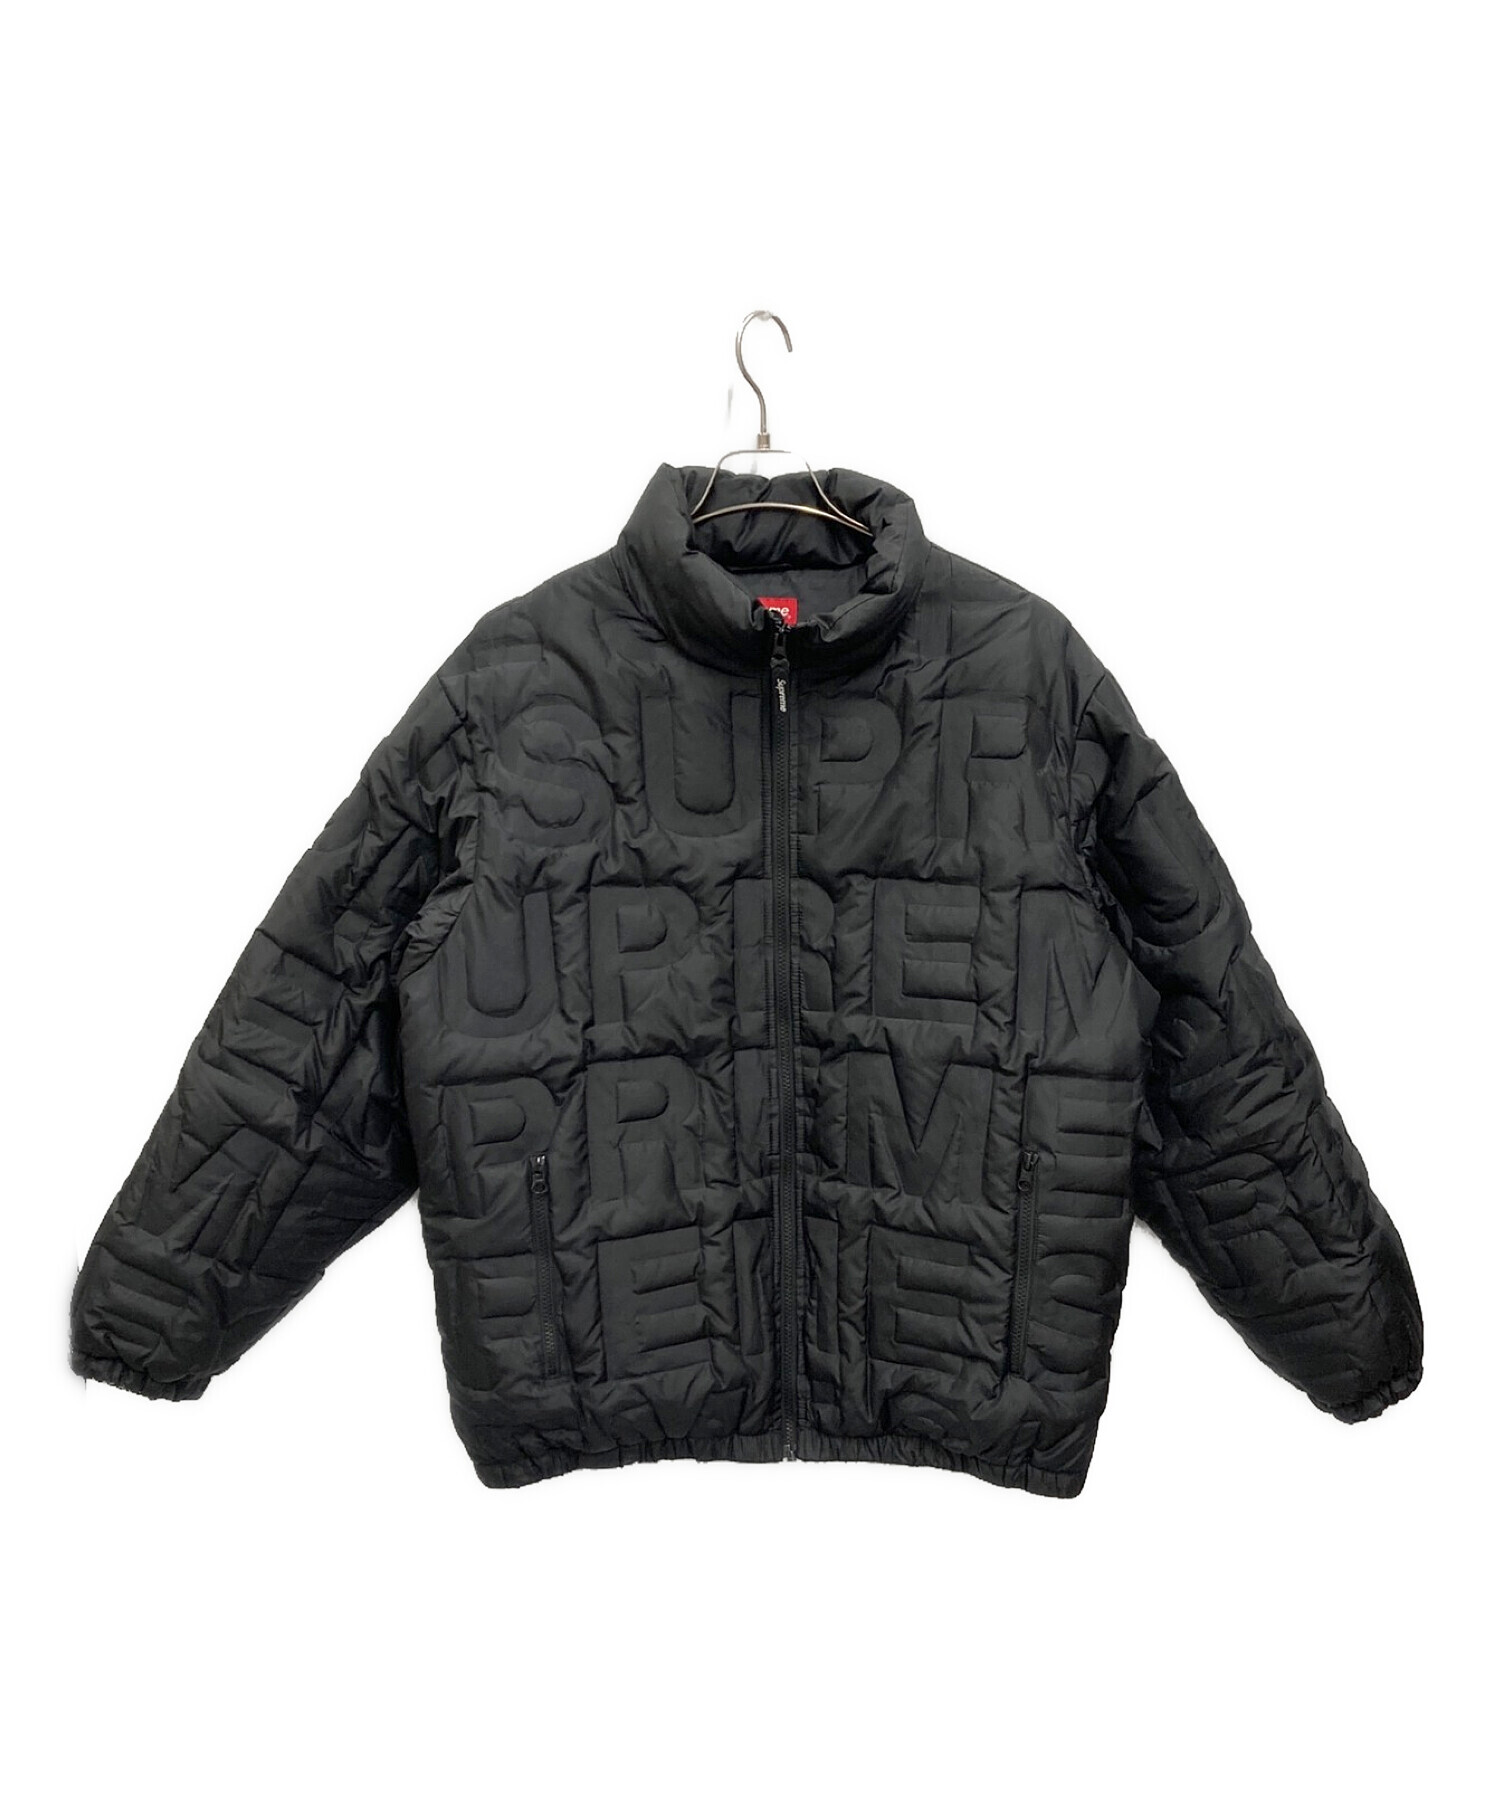 supreme シュプリーム quilted puffy jacket季節感冬